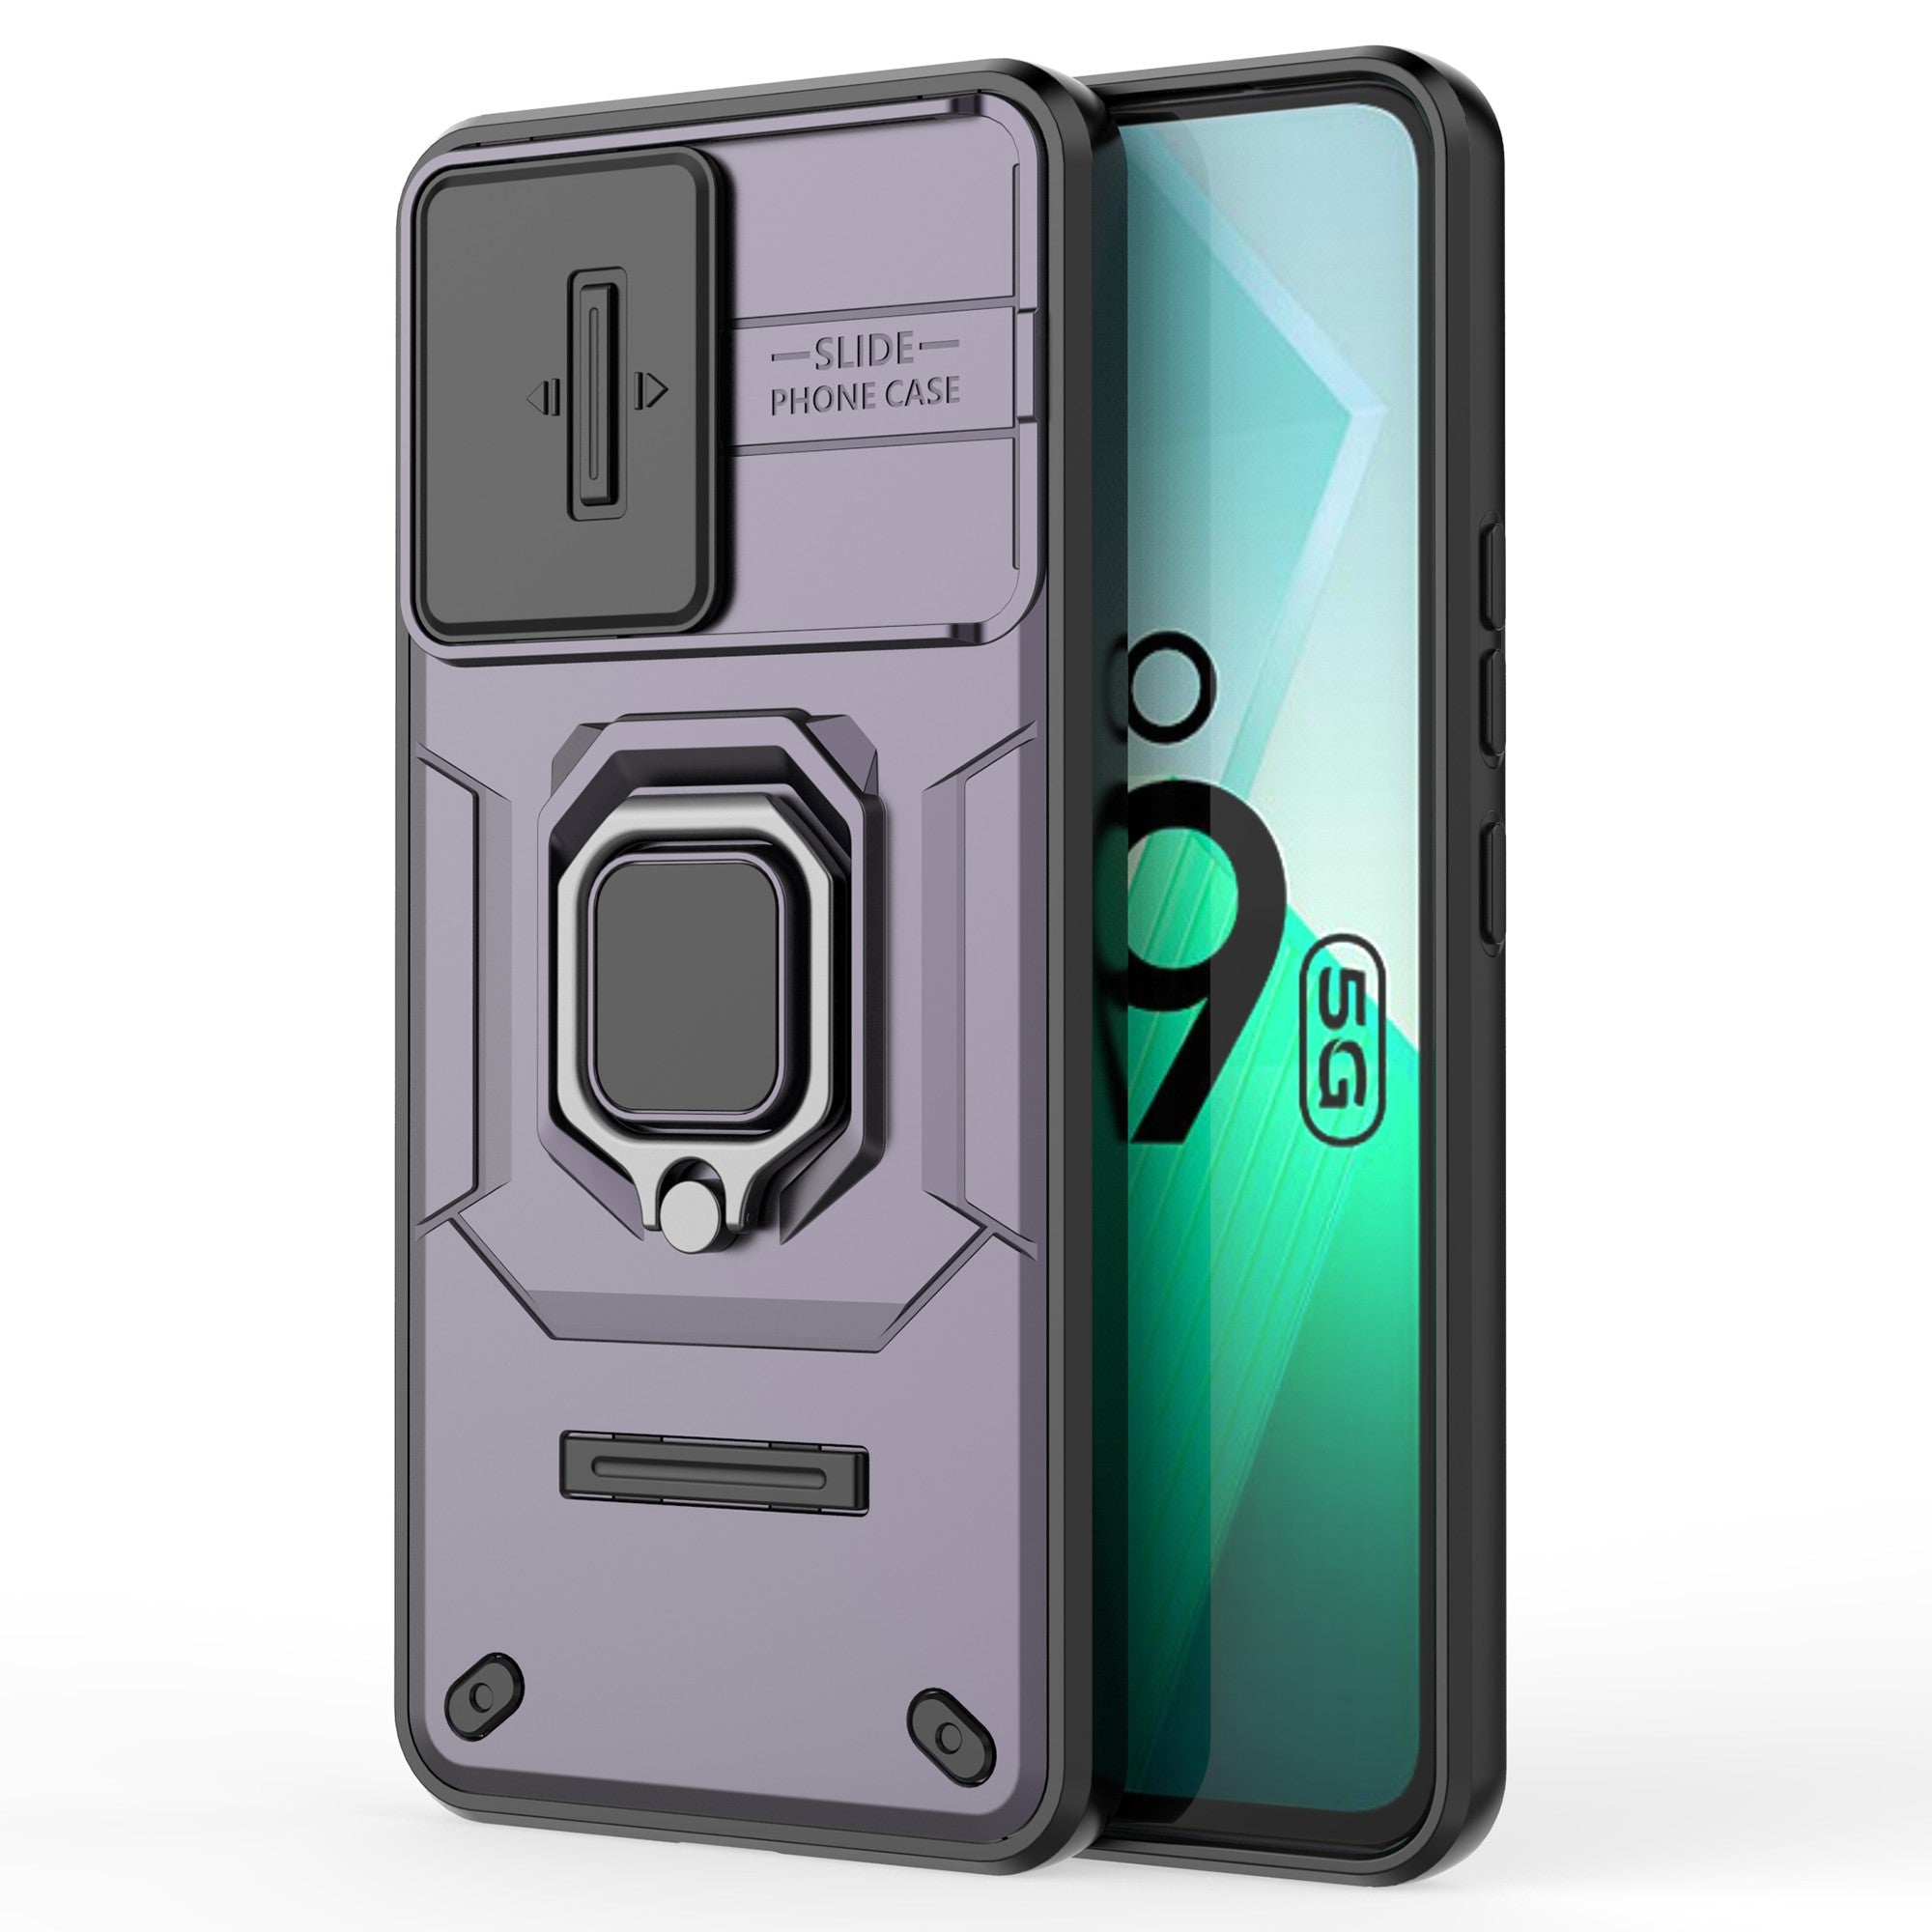 For vivo iQOO Z9 5G Camera Protection Case Kickstand Shockproof Rugged PC+TPU Phone Cover - Purple